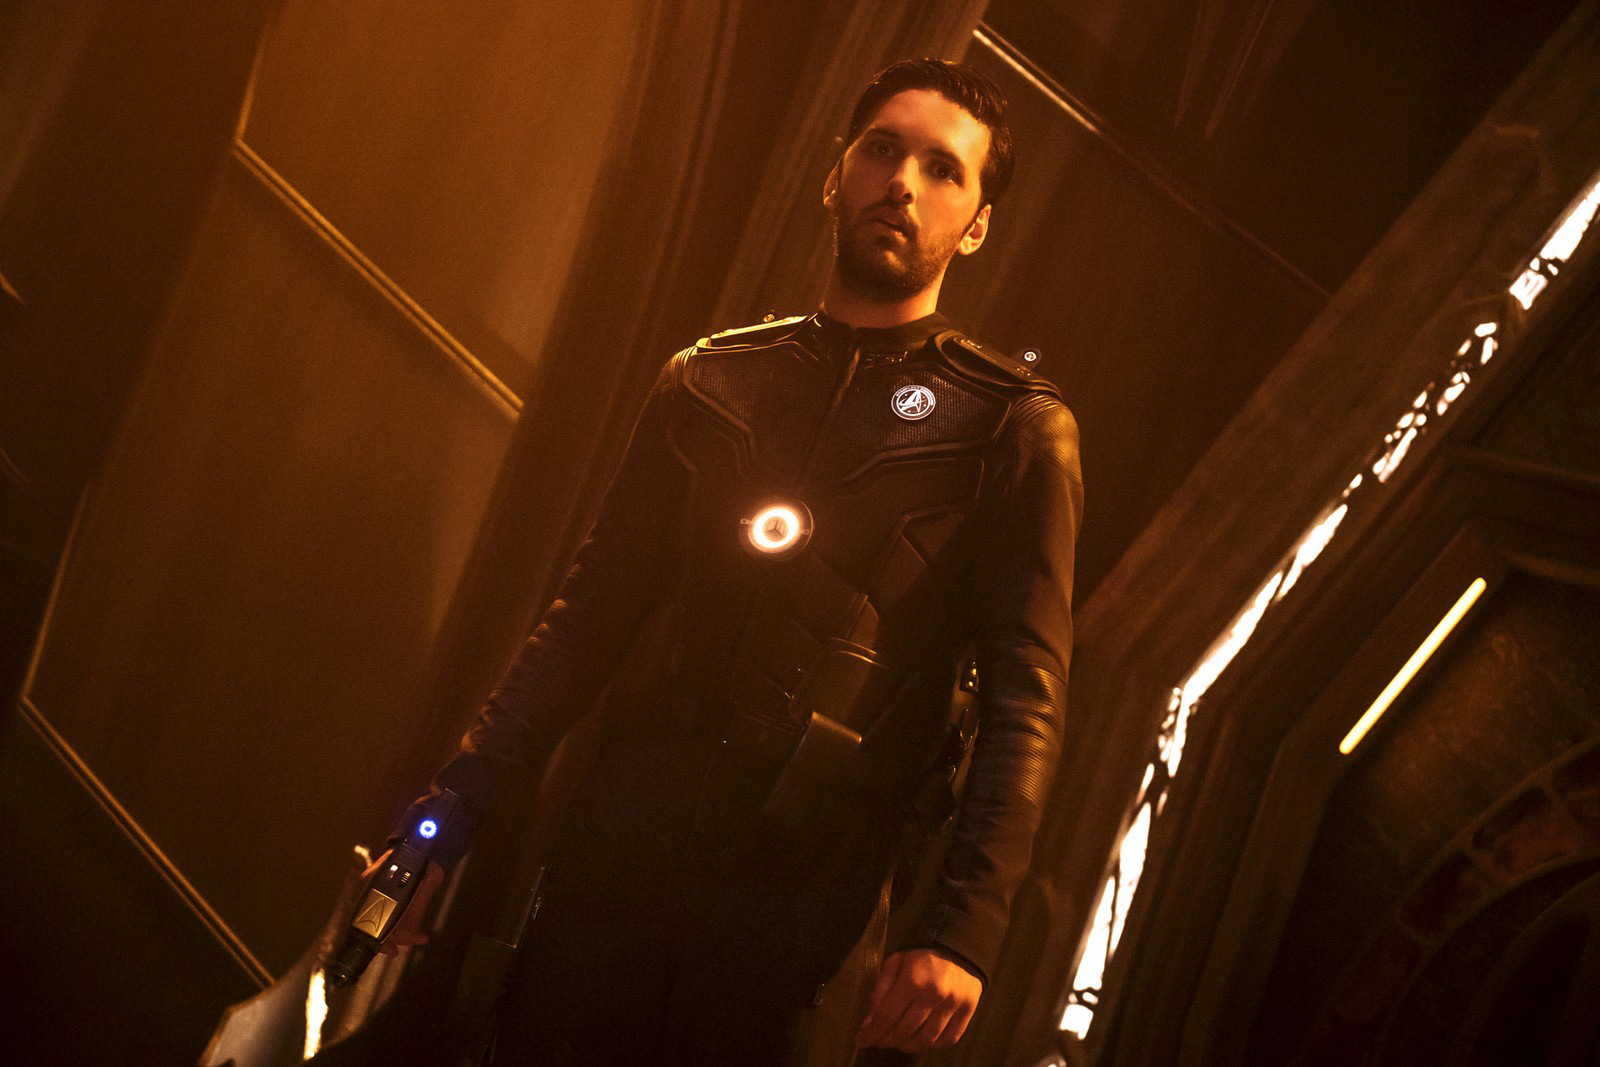 This Week’s Star Trek: Discovery Was A Great Climax To A Show We Never Got